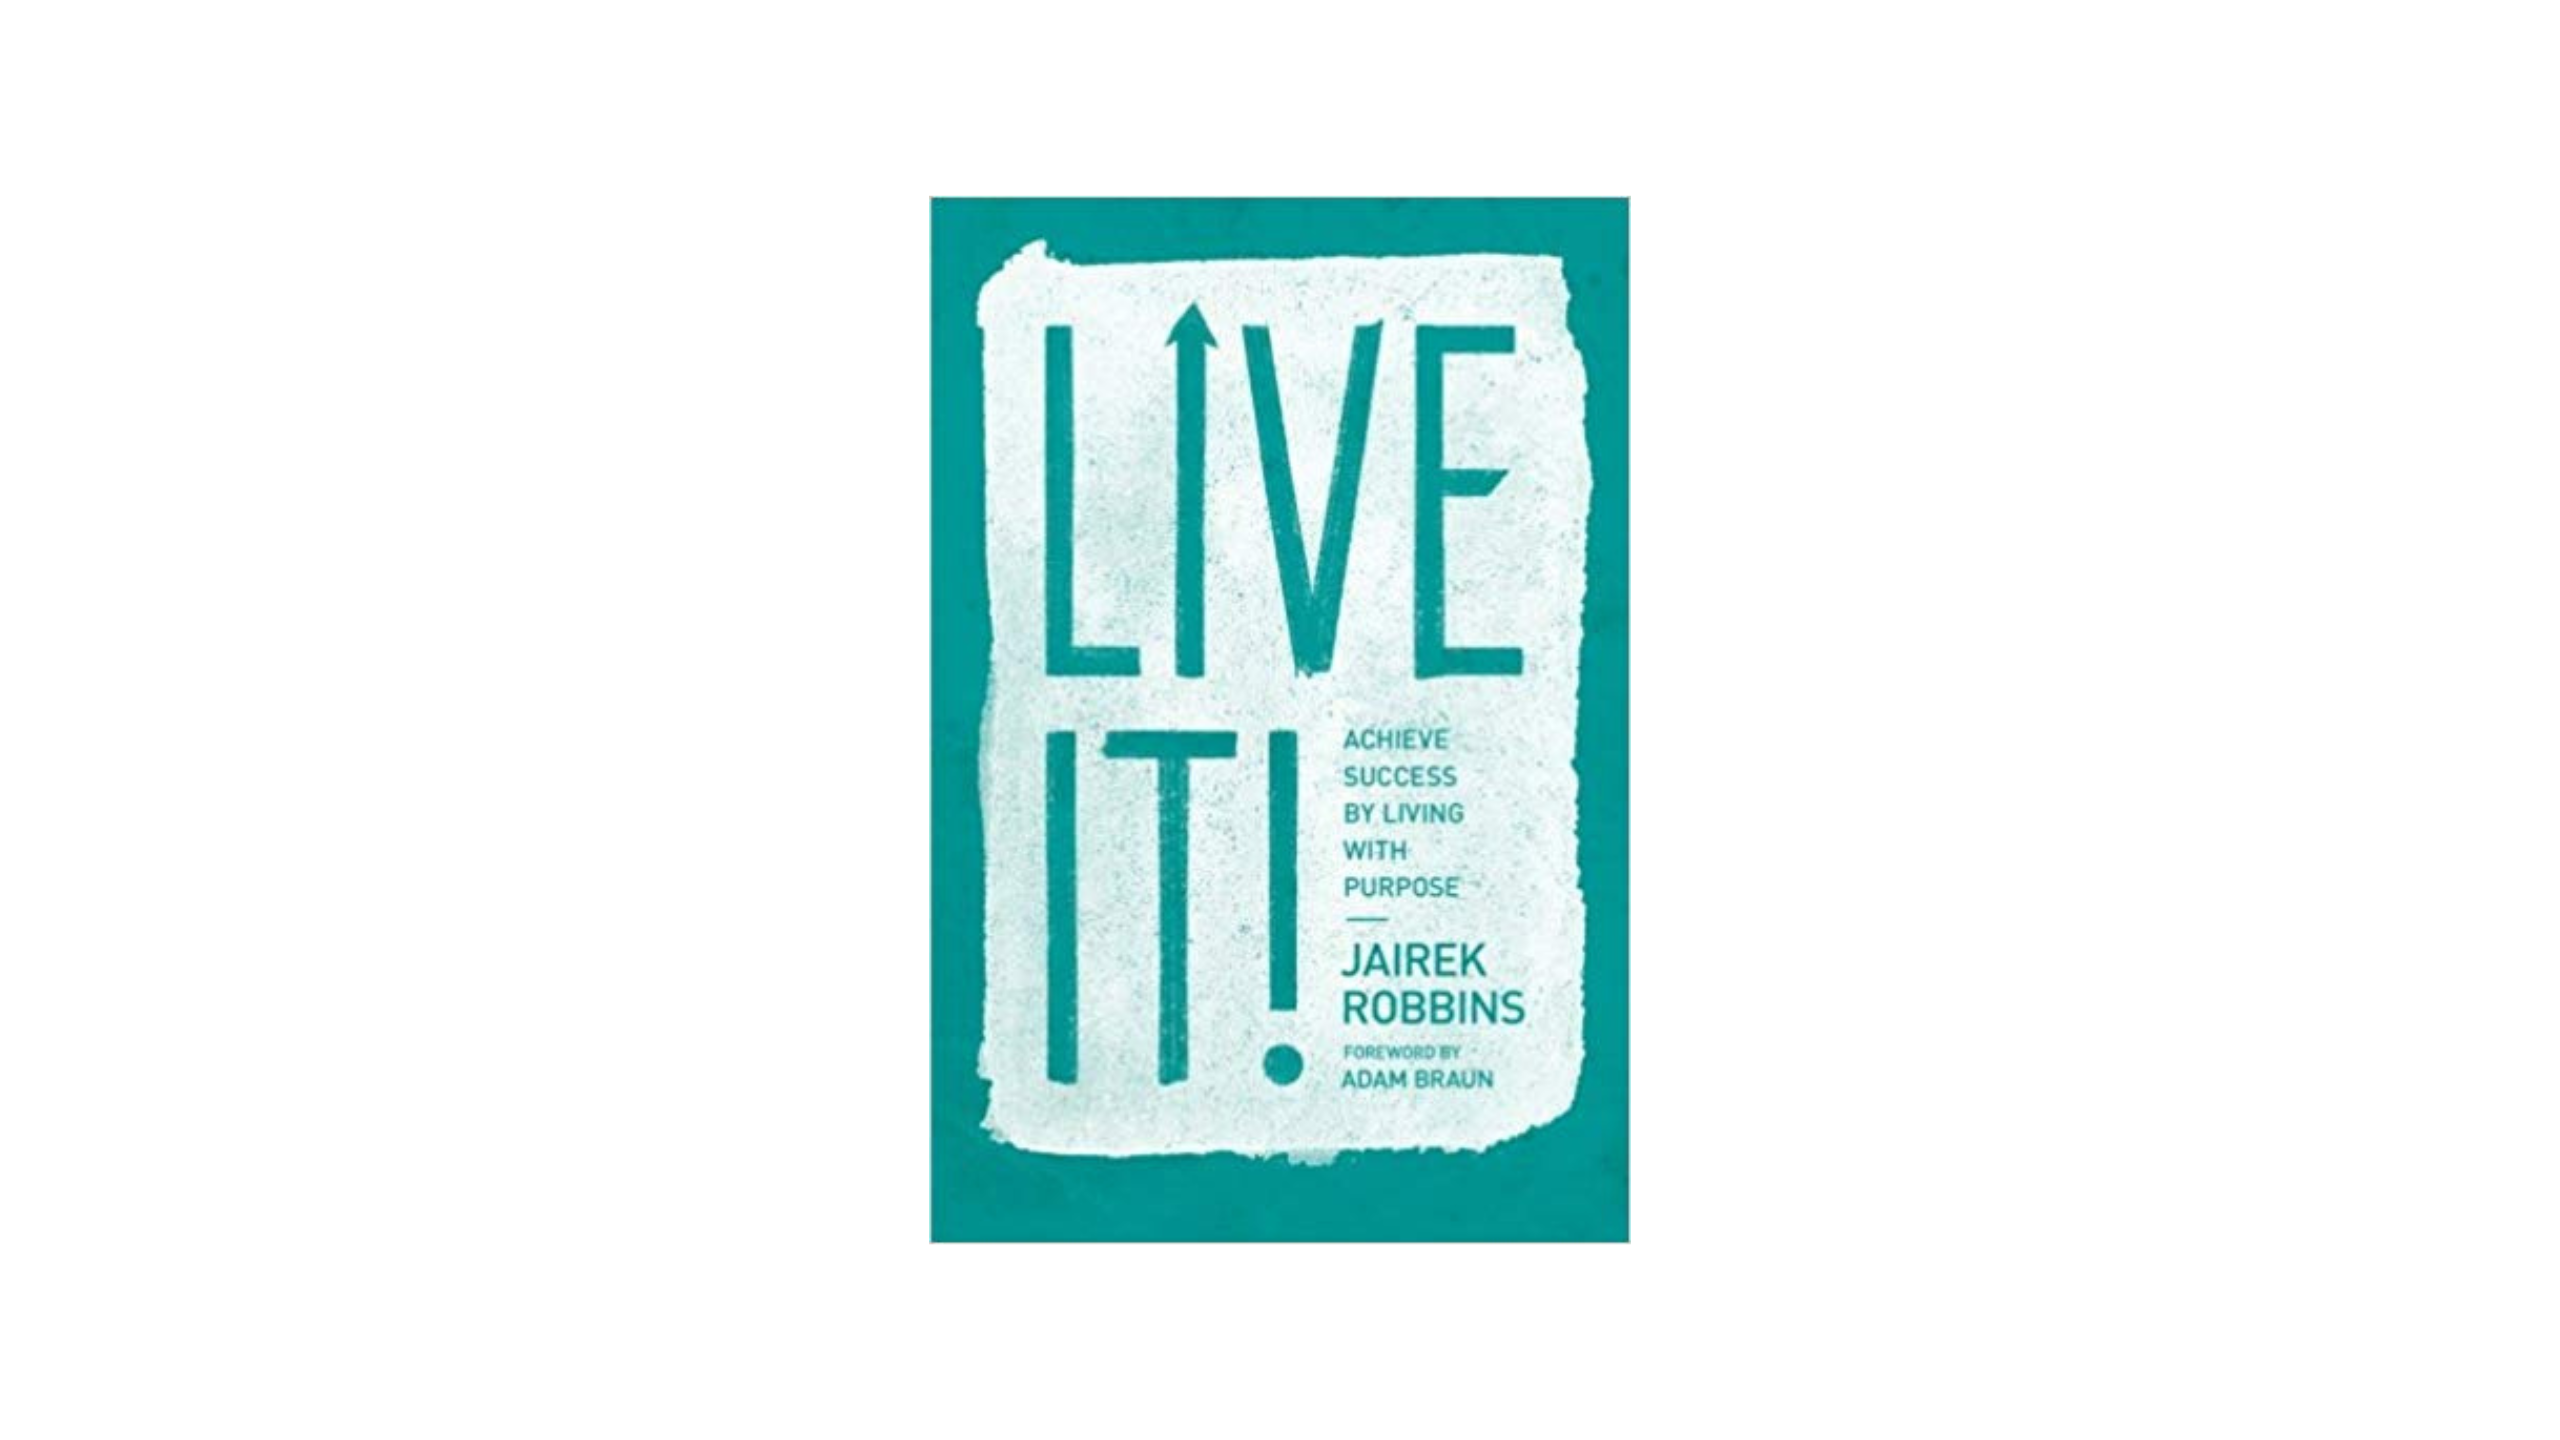 Book Notes: Live It! Achieve Success By Living With Purpose By Jairek Robbins.